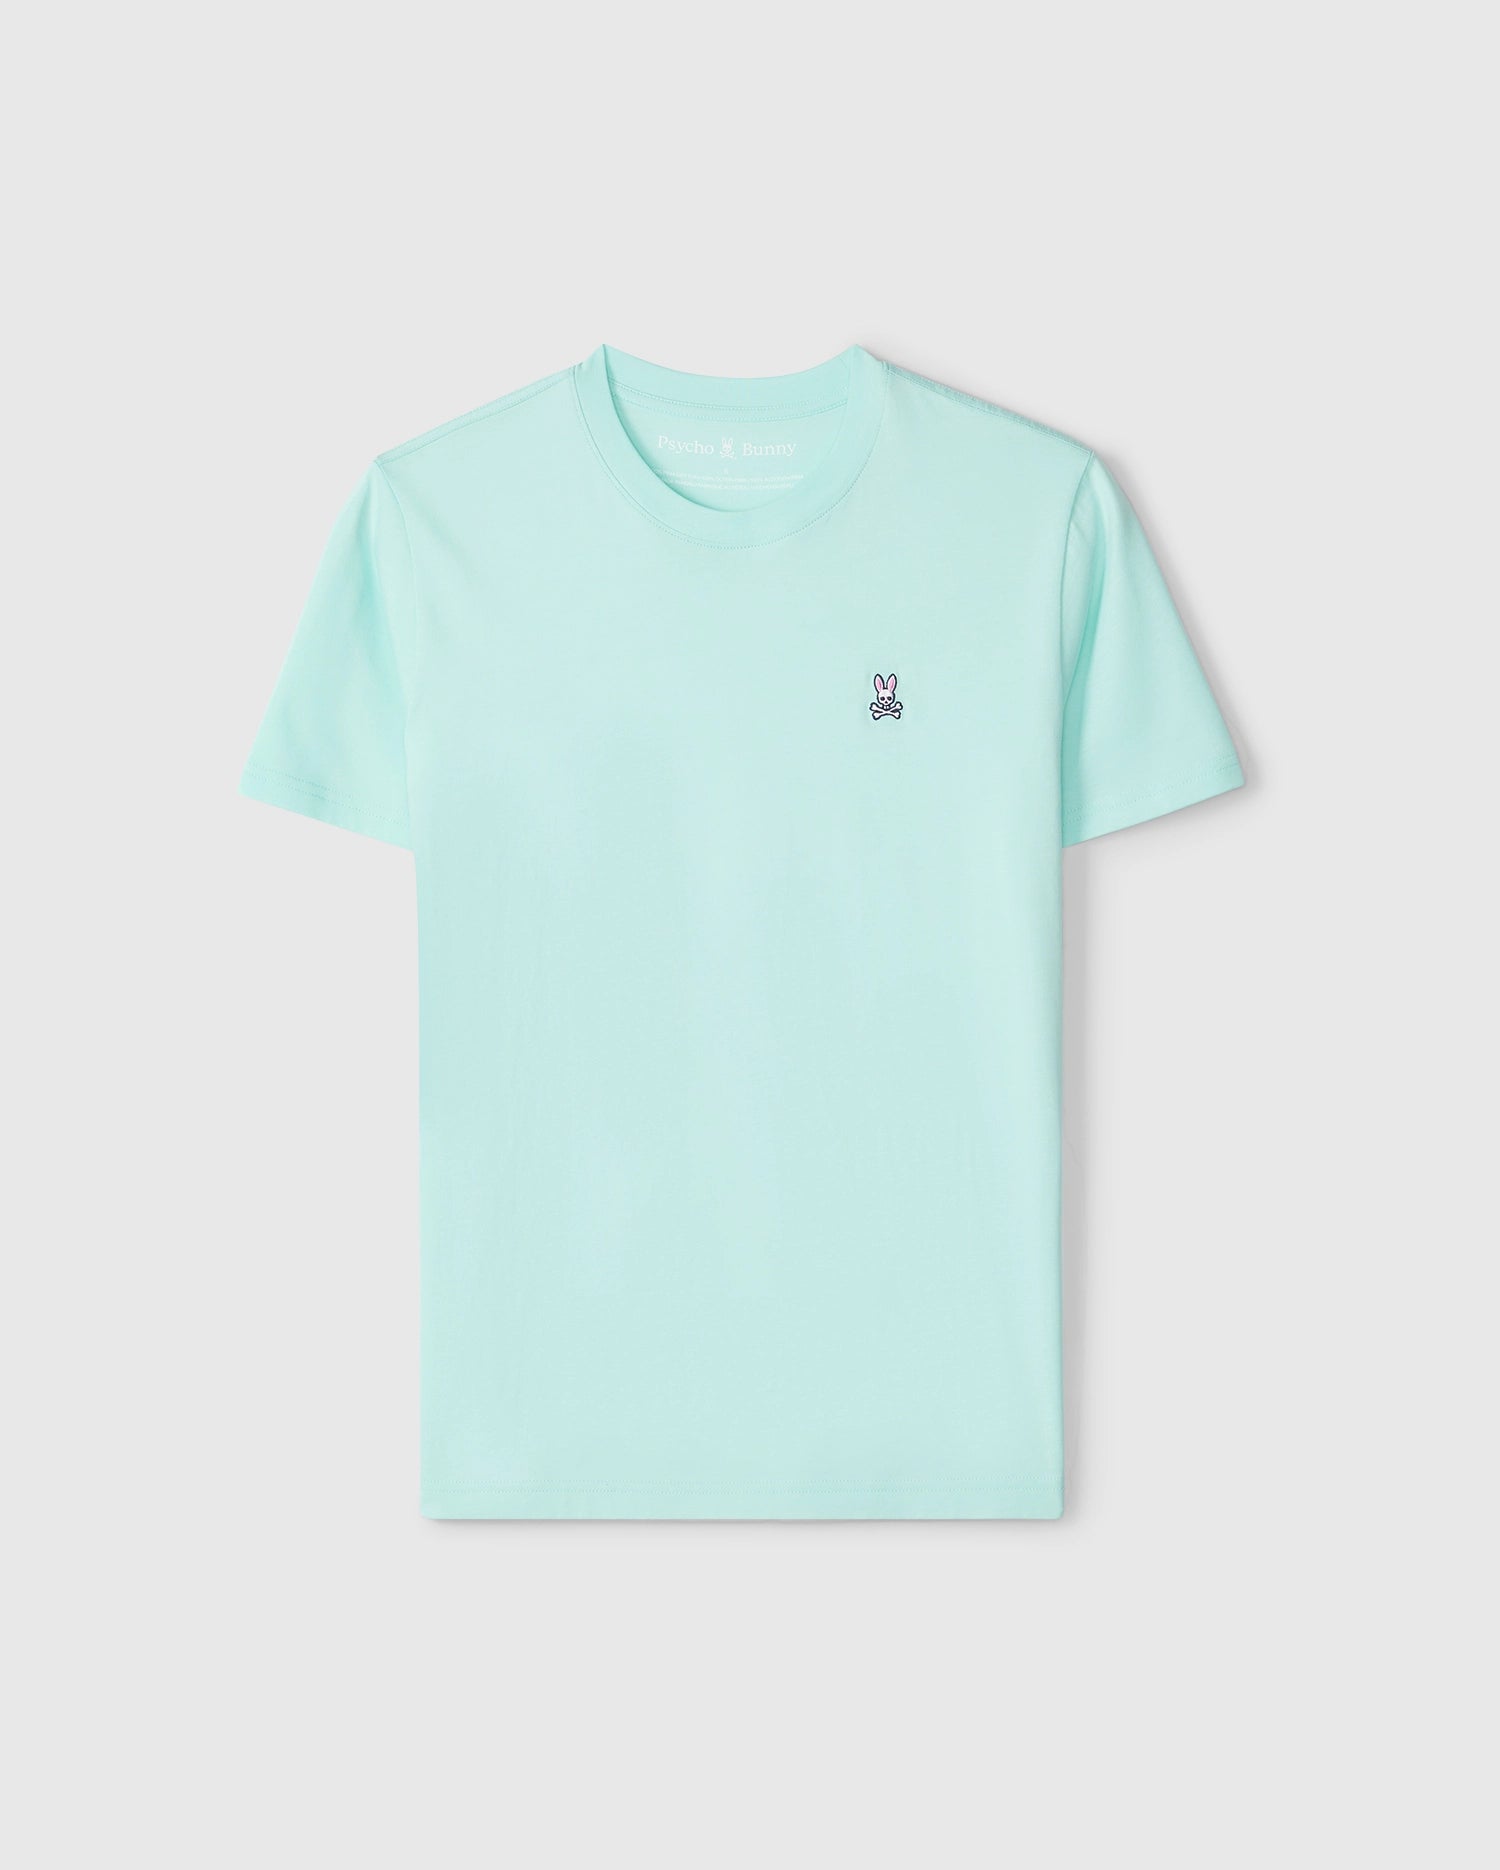 A plain light blue MENS CLASSIC CREW NECK TEE made of high-quality cotton, displayed on a white background with a small black logo on the left chest area. The shirt has short sleeves.